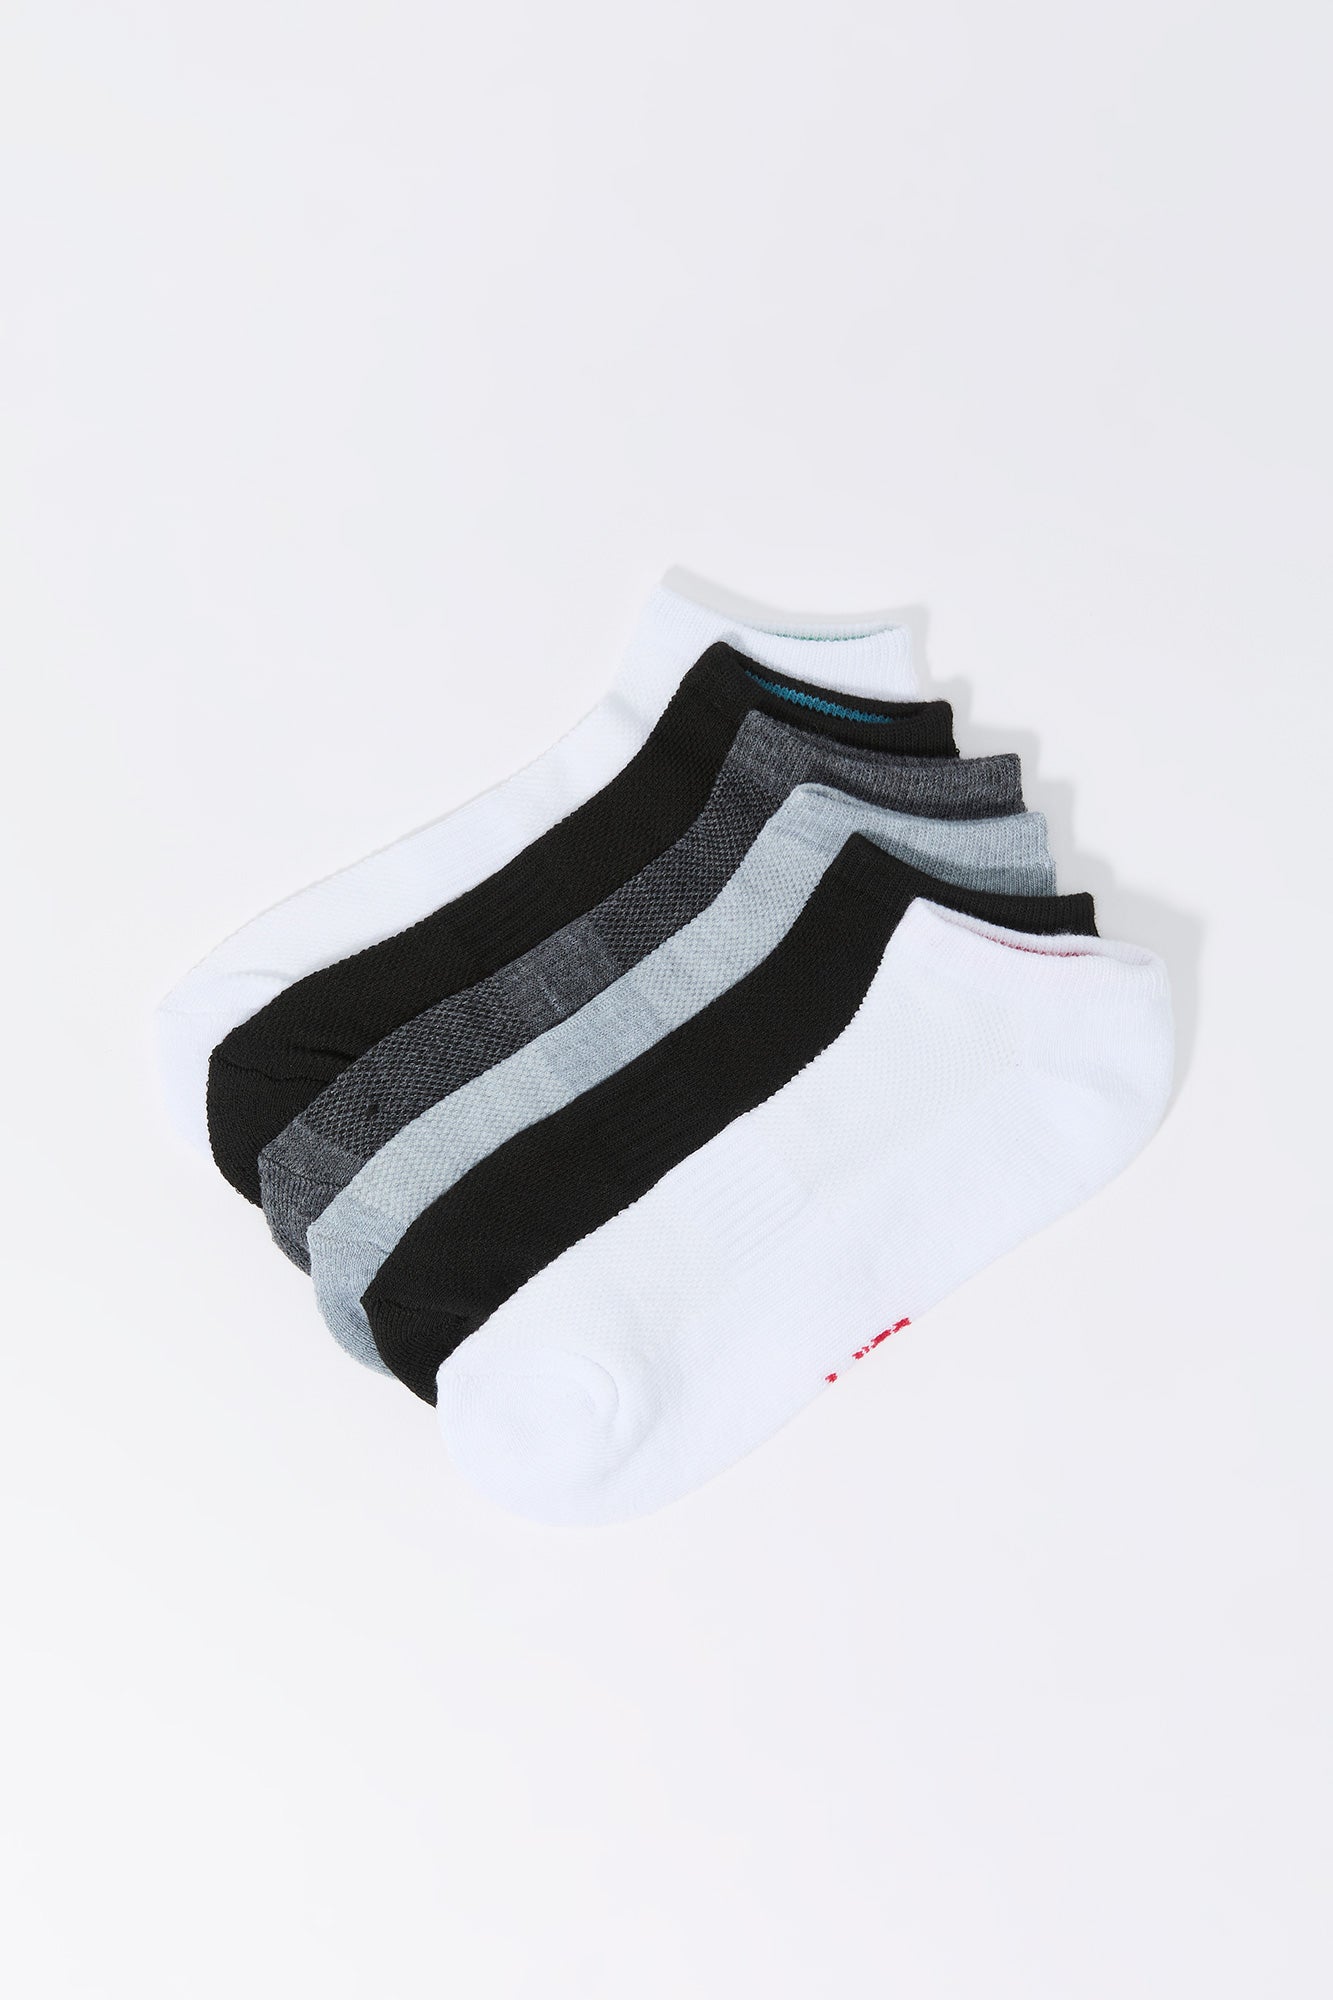 Assorted Ankle Socks (6 Pack)